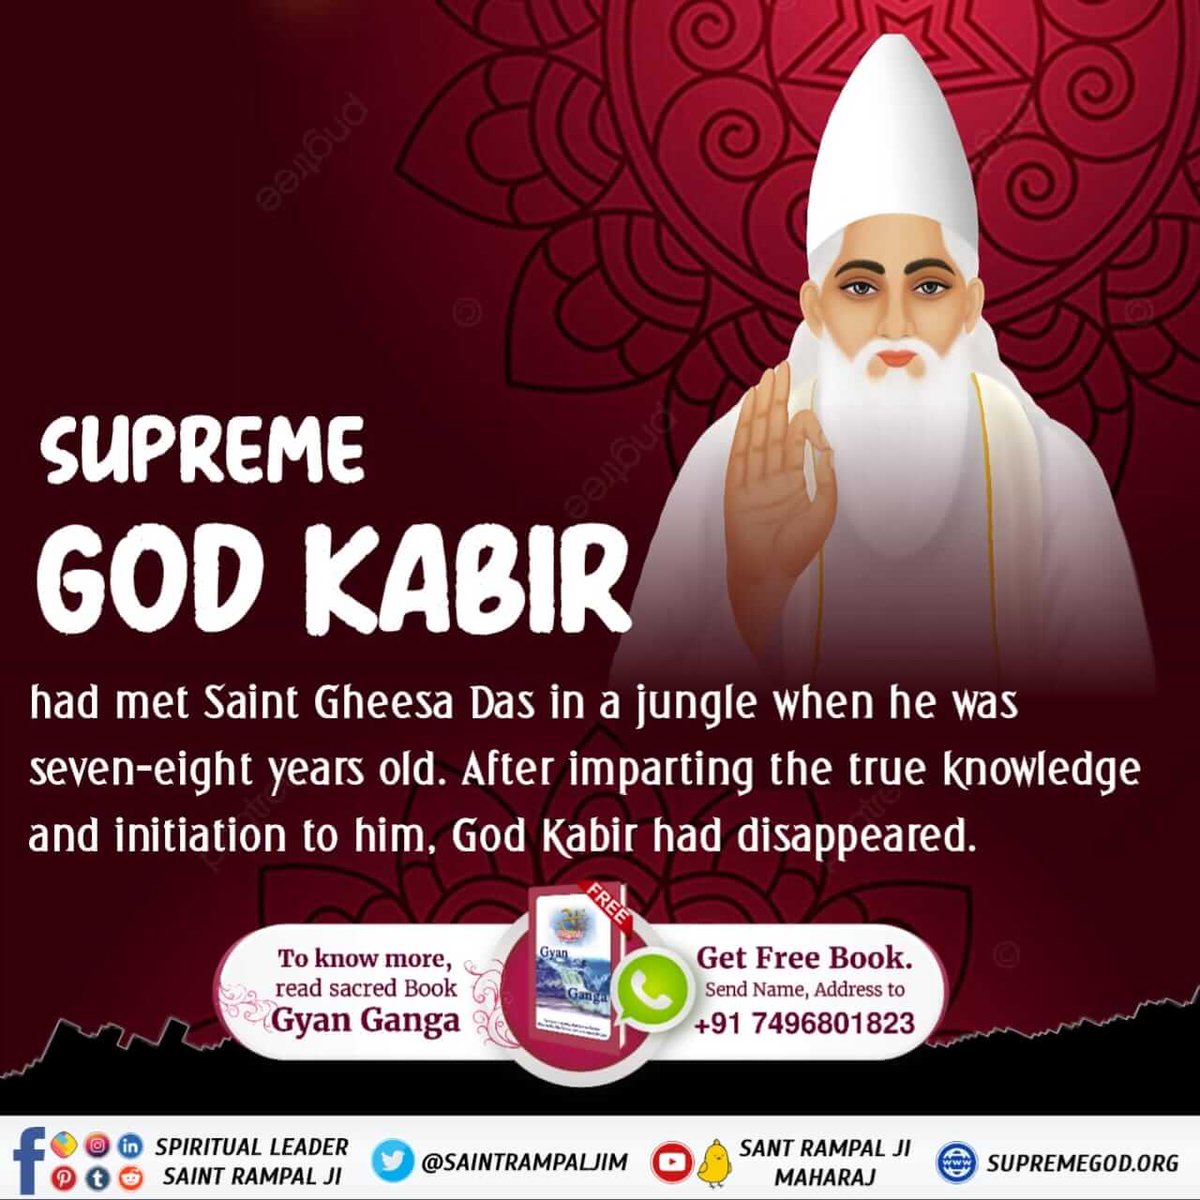 #आँखों_देखा_भगवान_को सुनो उस अमृतज्ञान को 🪴 SUPREME GOD KABIR 🪴 had met Saint Gheesa Das in a jungle when he was seven-eight years old. After imparting the true knowledge and initiation to him, God Kabir had disappeared.